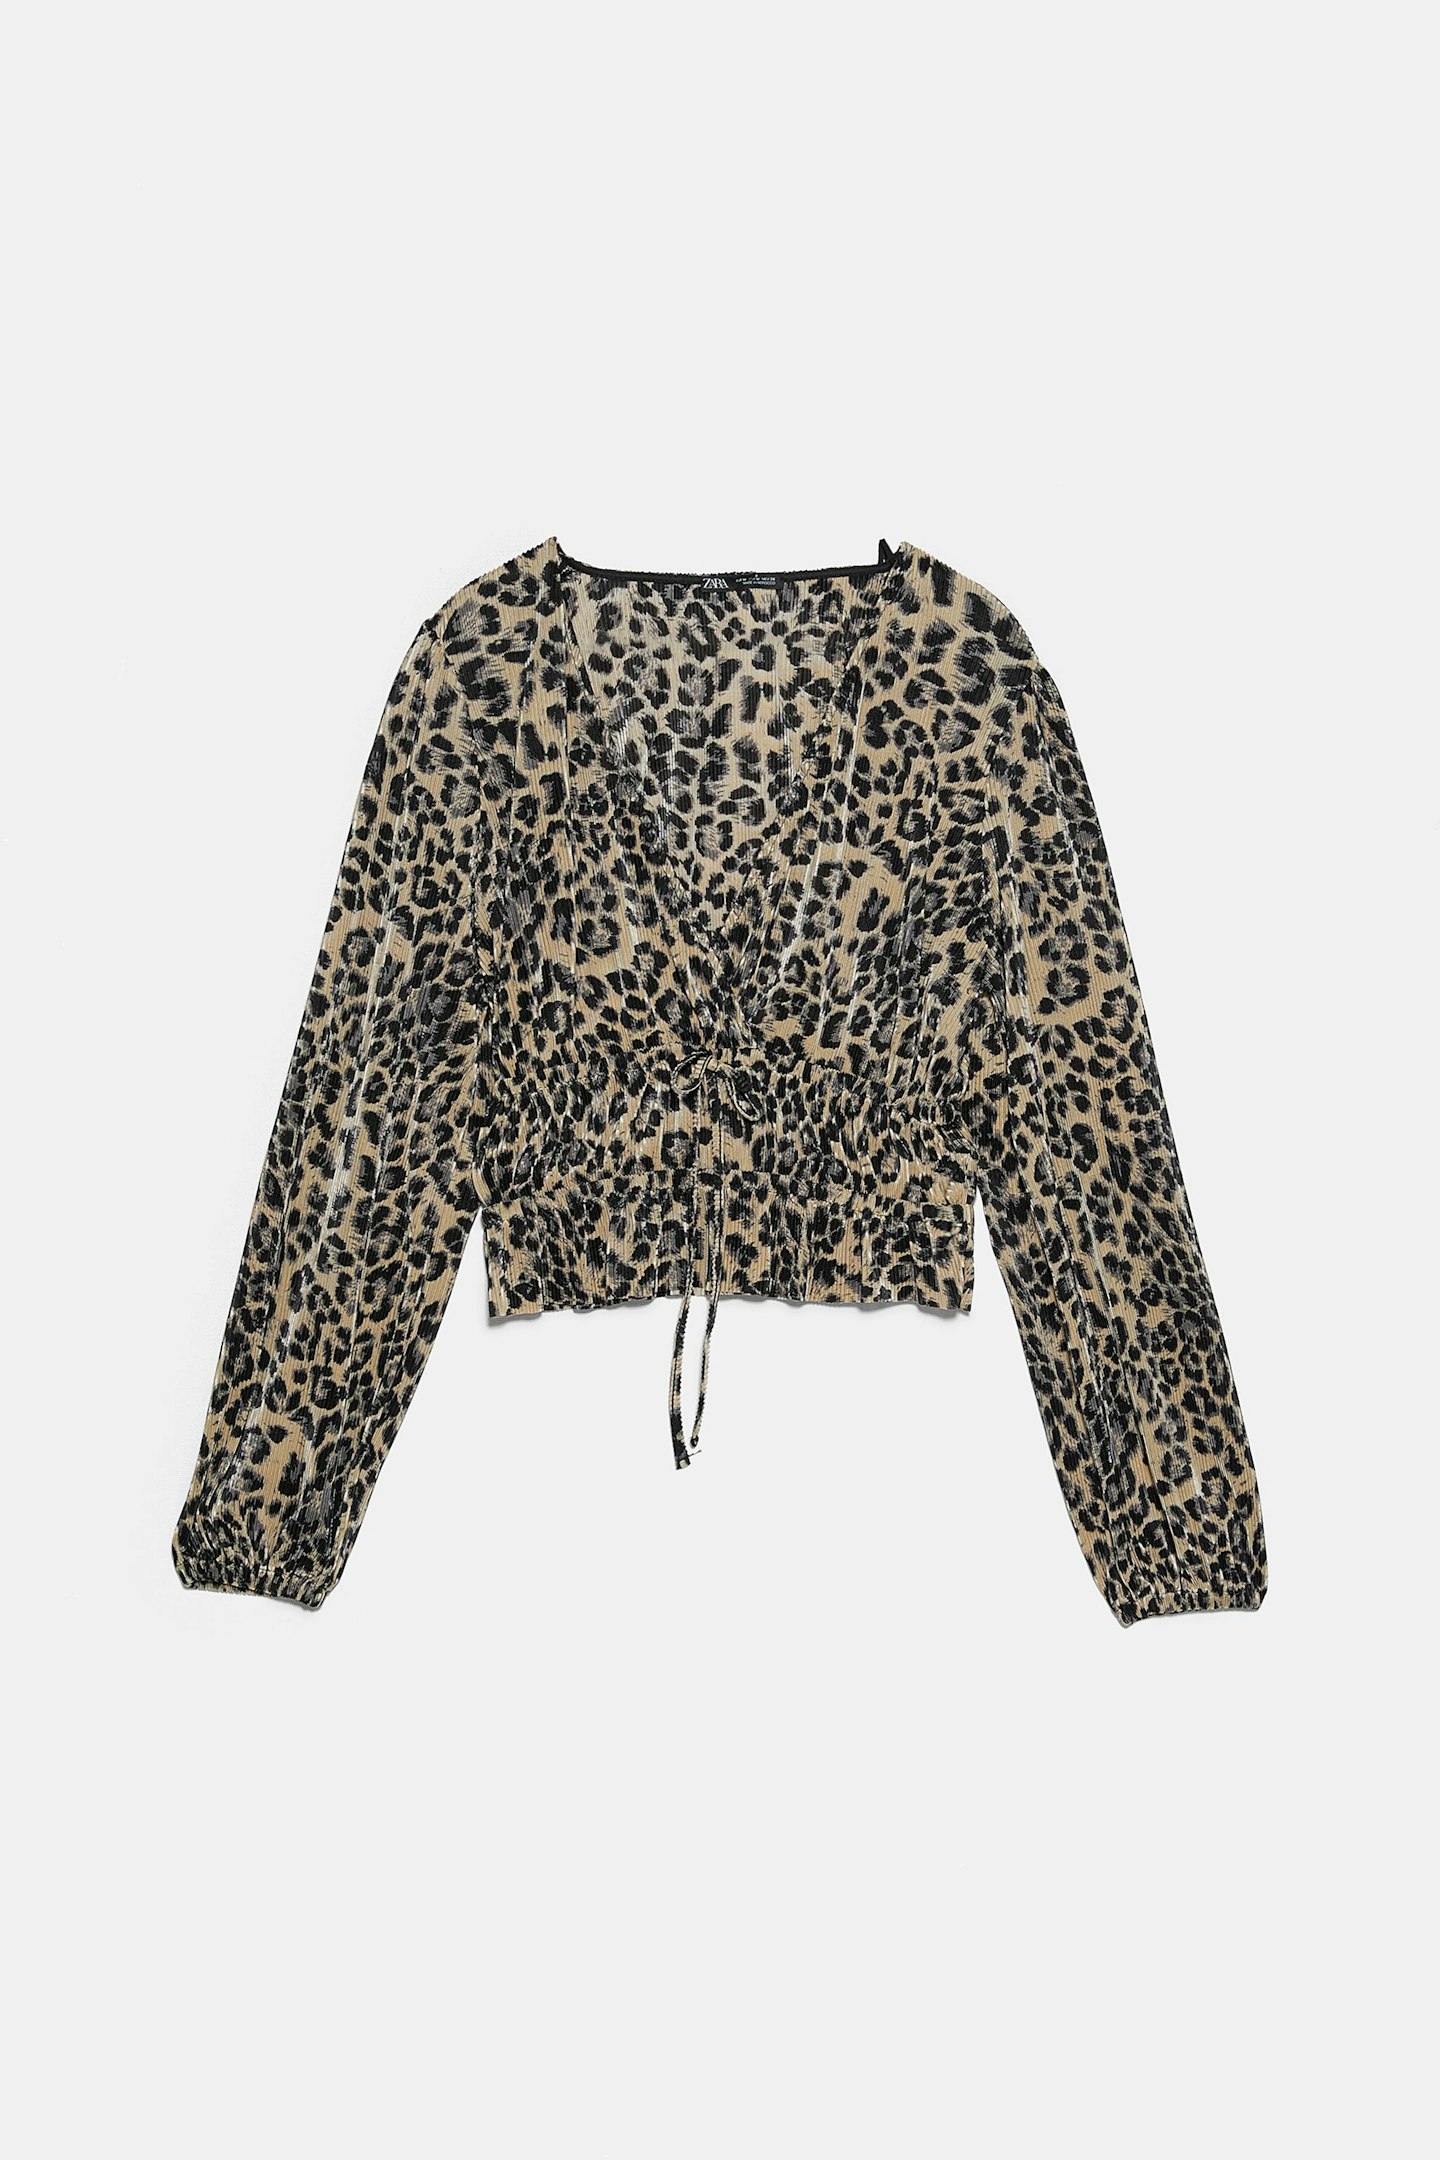 We've Fallen Back In Love With Animal Print Thanks To Tiger King ...